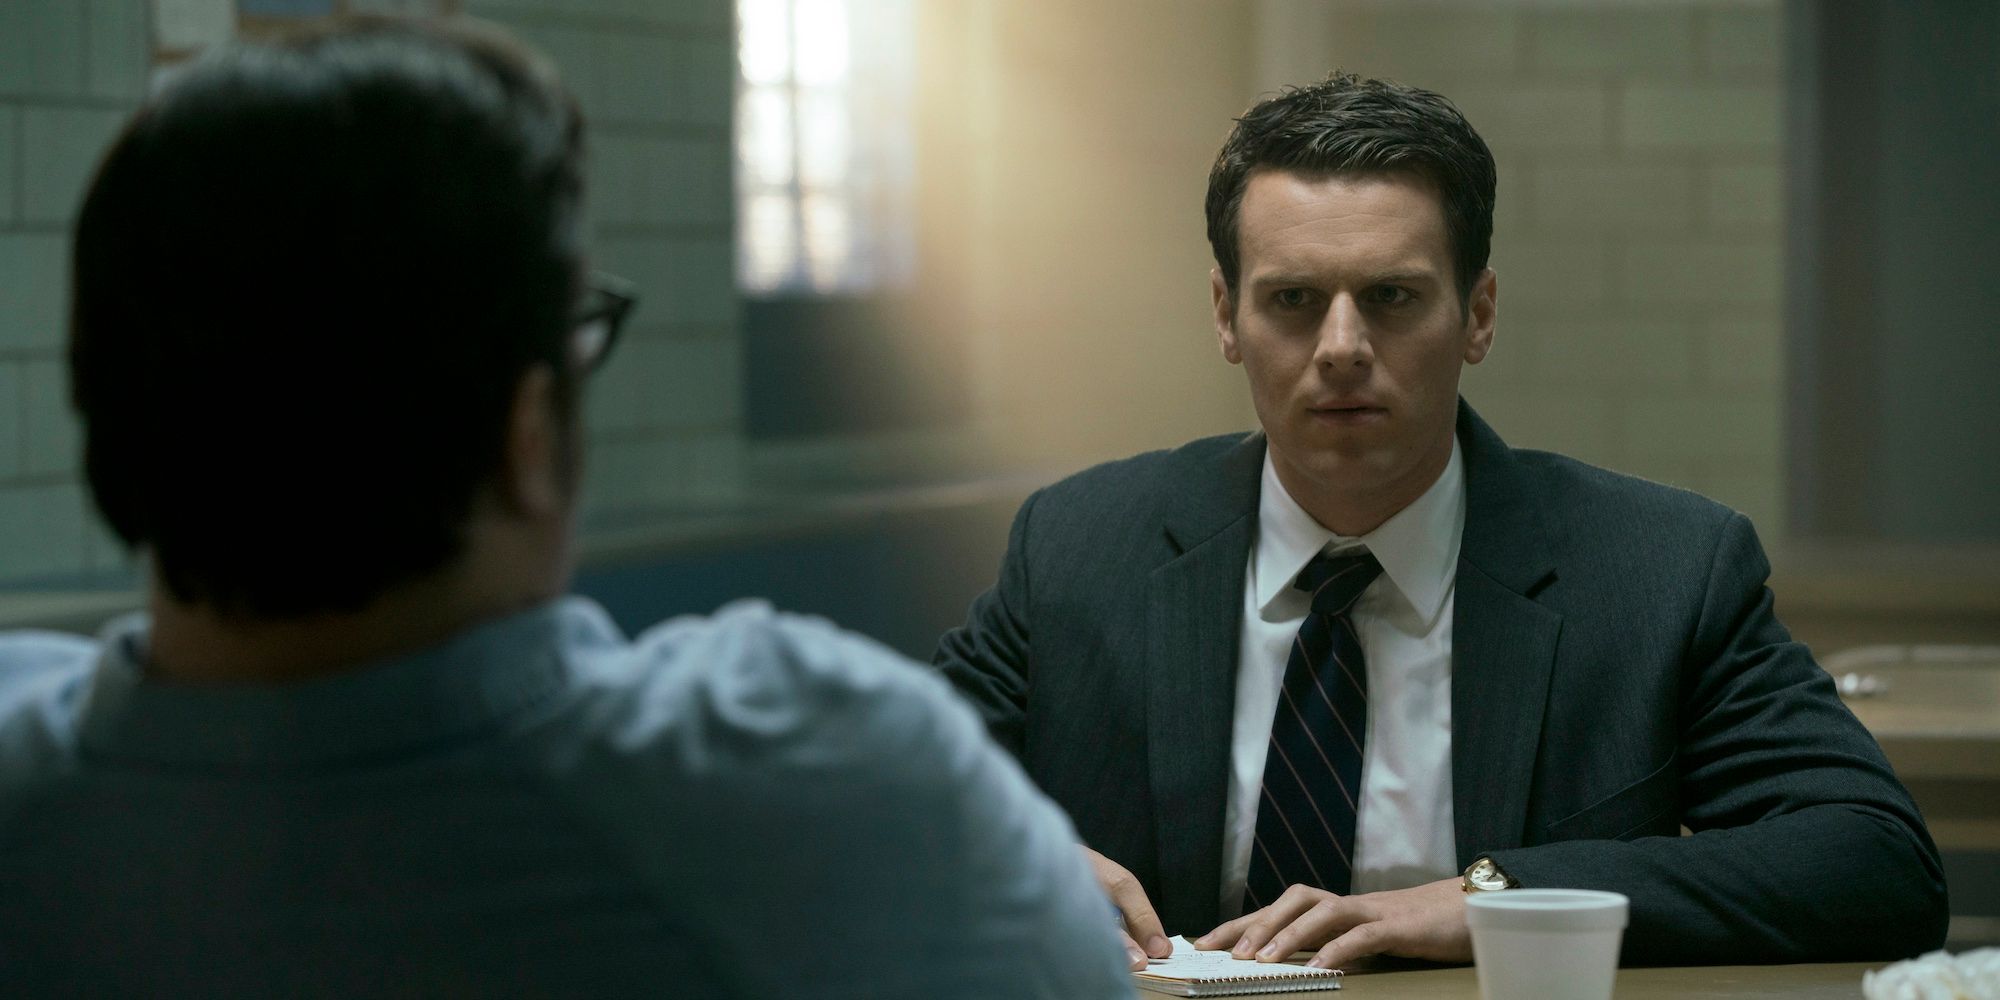 15 MustSee Shows For Fans of True Detective to Watch